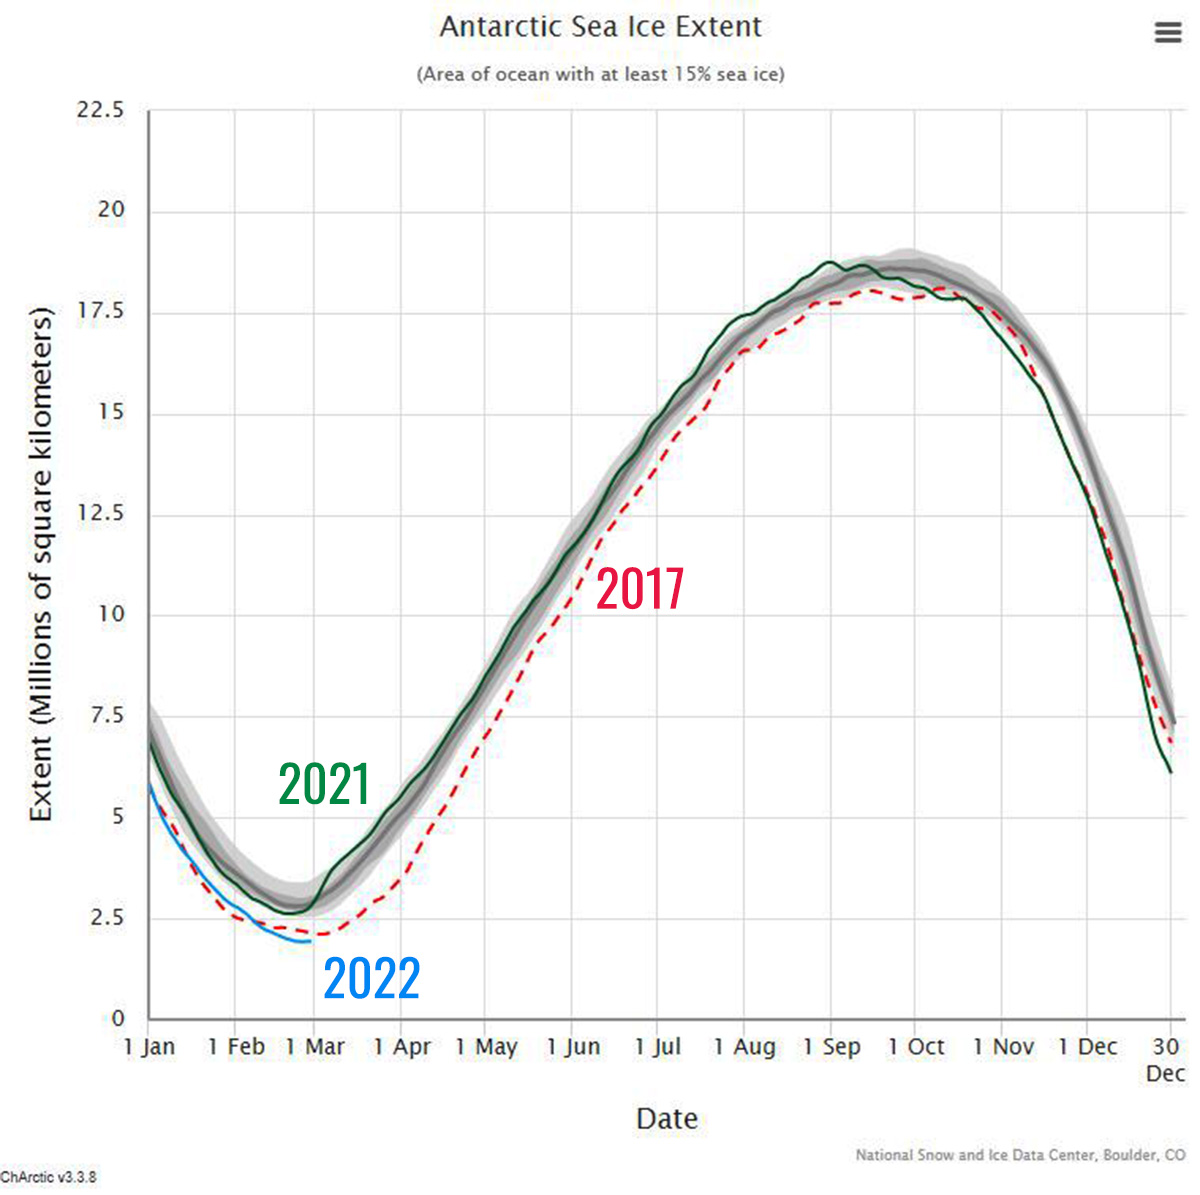 antarctic-sea-ice-extent-all-time-low-february-marked-negative-anomaly-2022